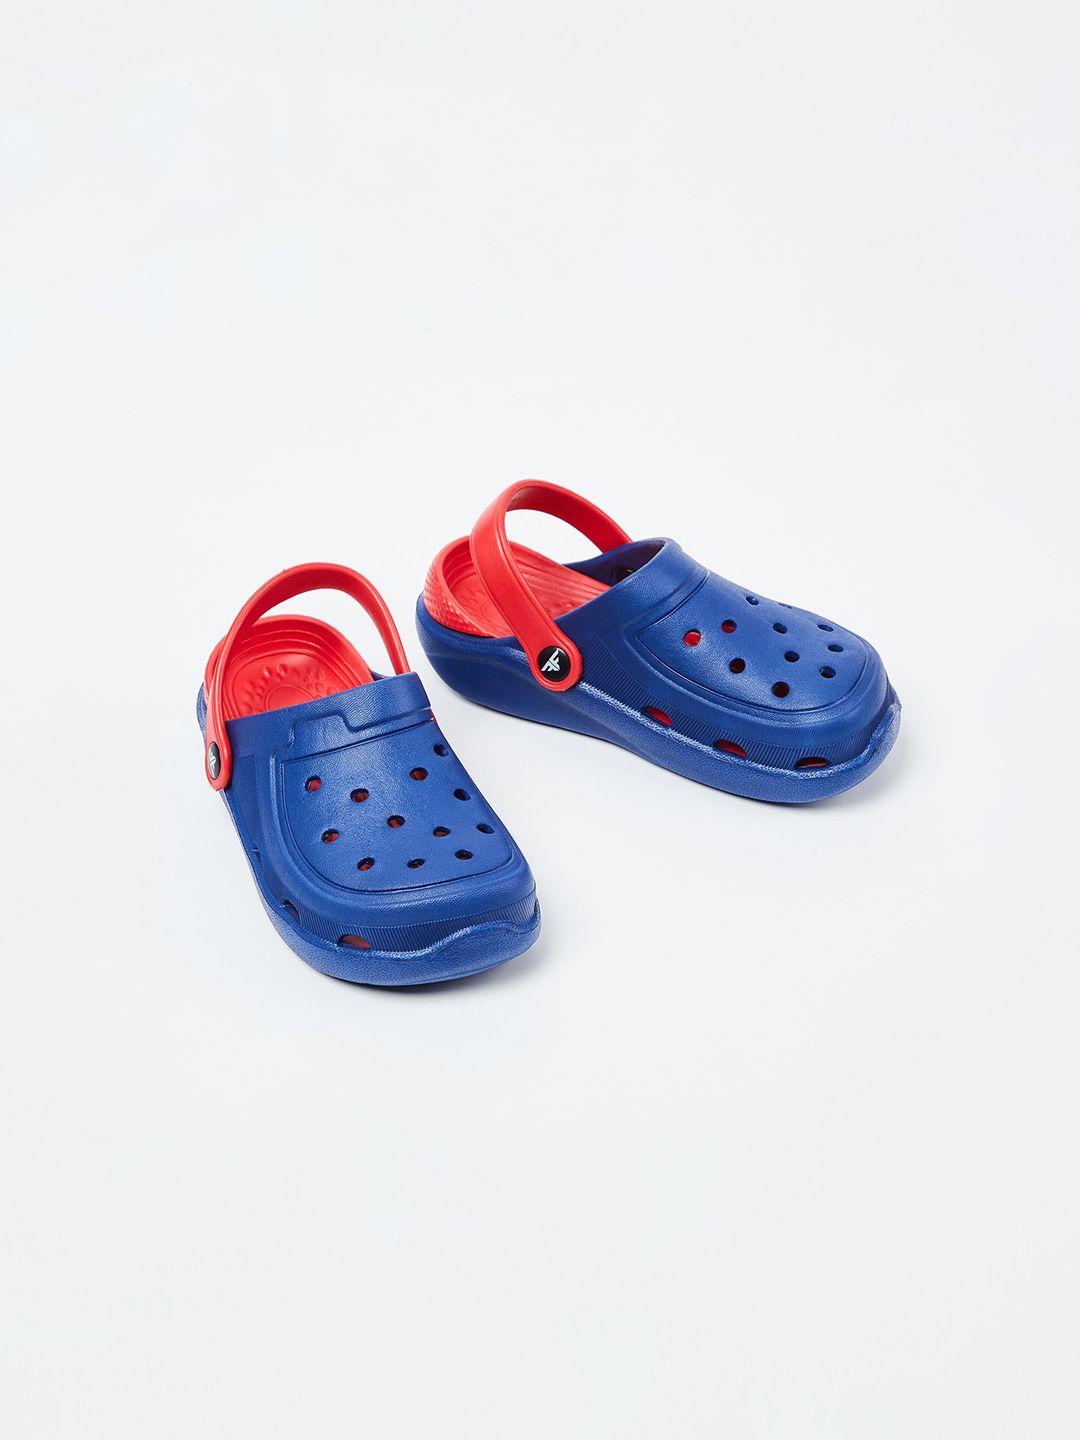 fame-forever-by-lifestyle-boys-navy-blue-&-red-solid-clogs